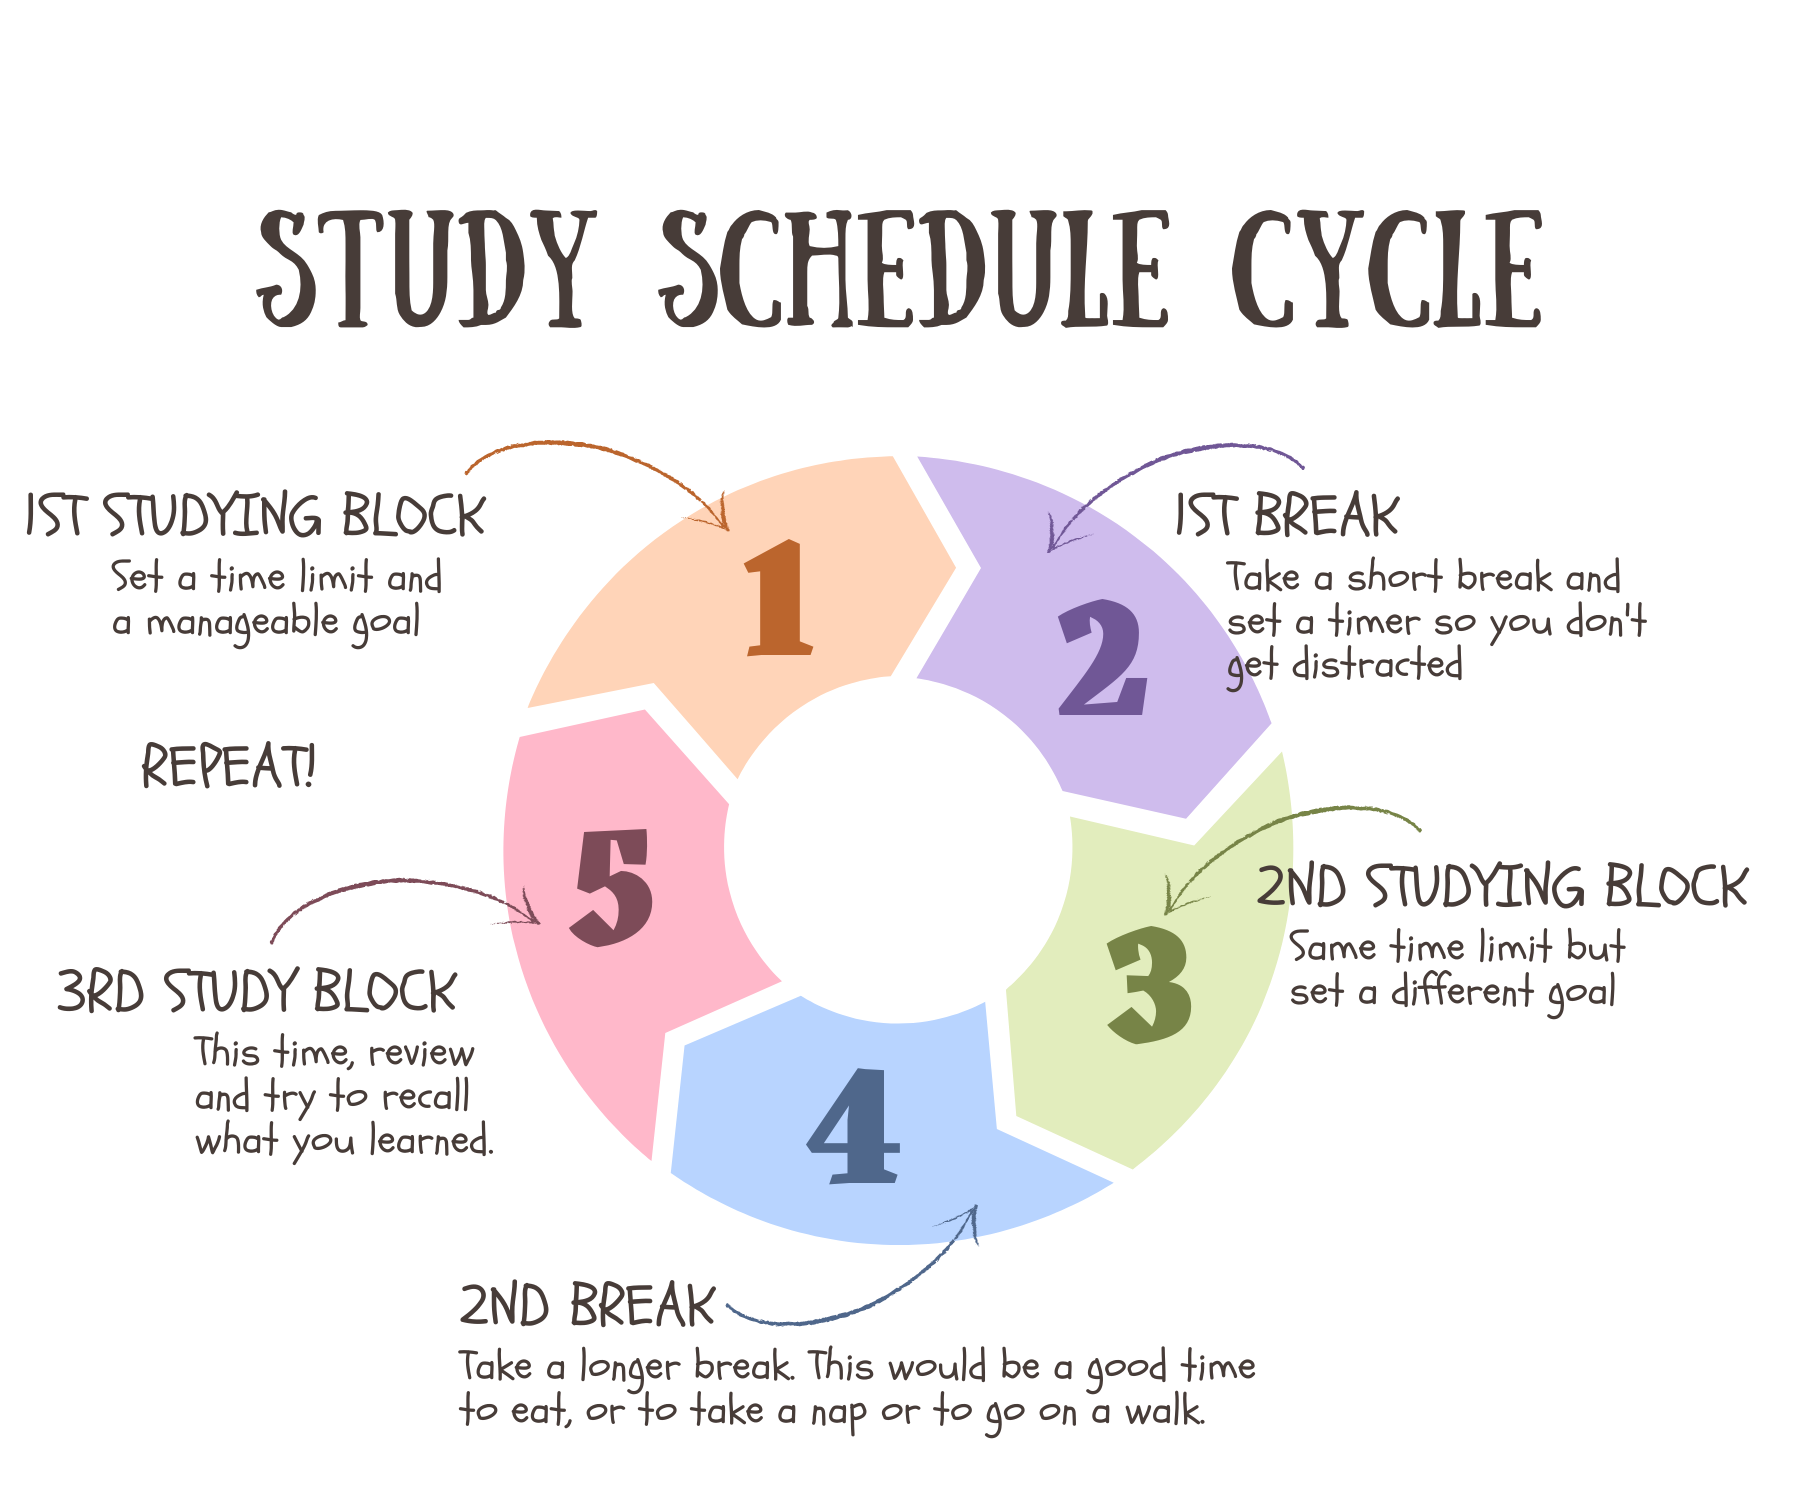 Study Schedule Cycle with 5 steps